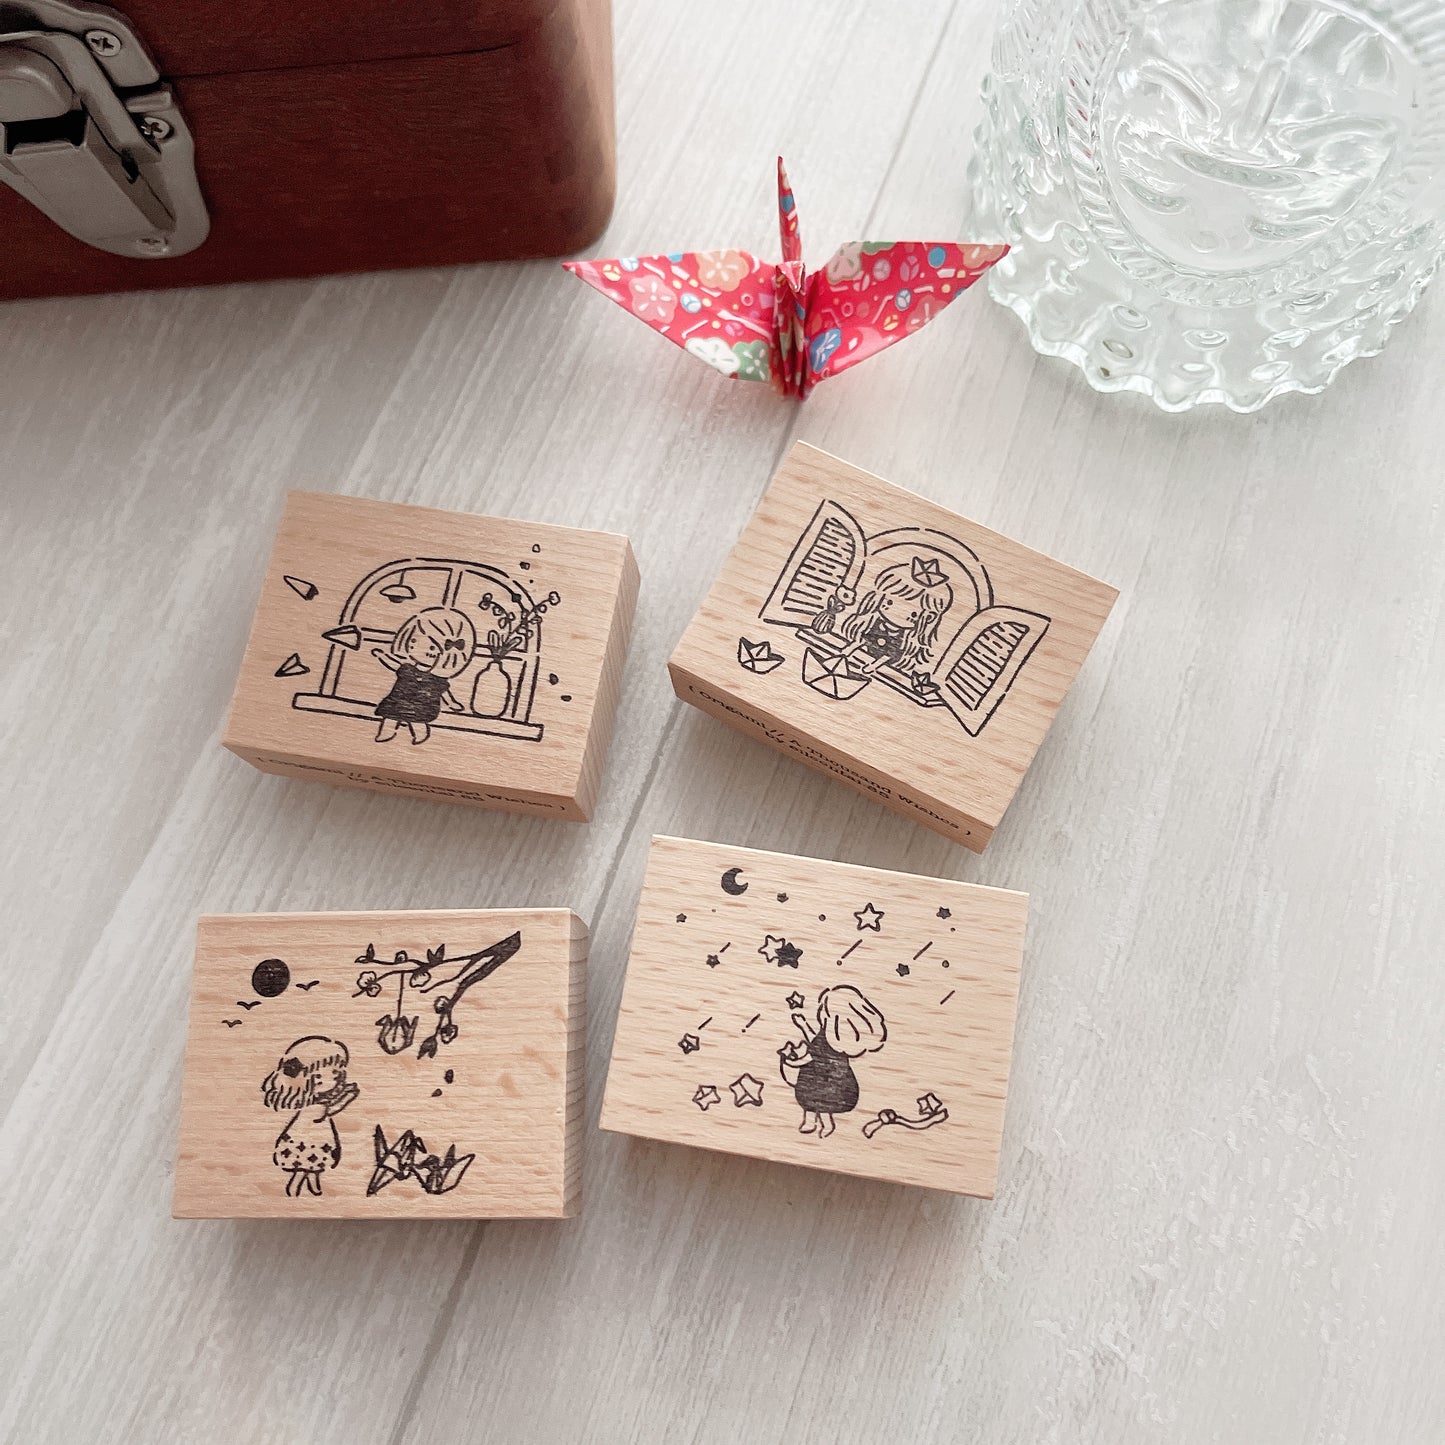 EileenTai.85 Origami Series Rubber Stamp // Paper Boats